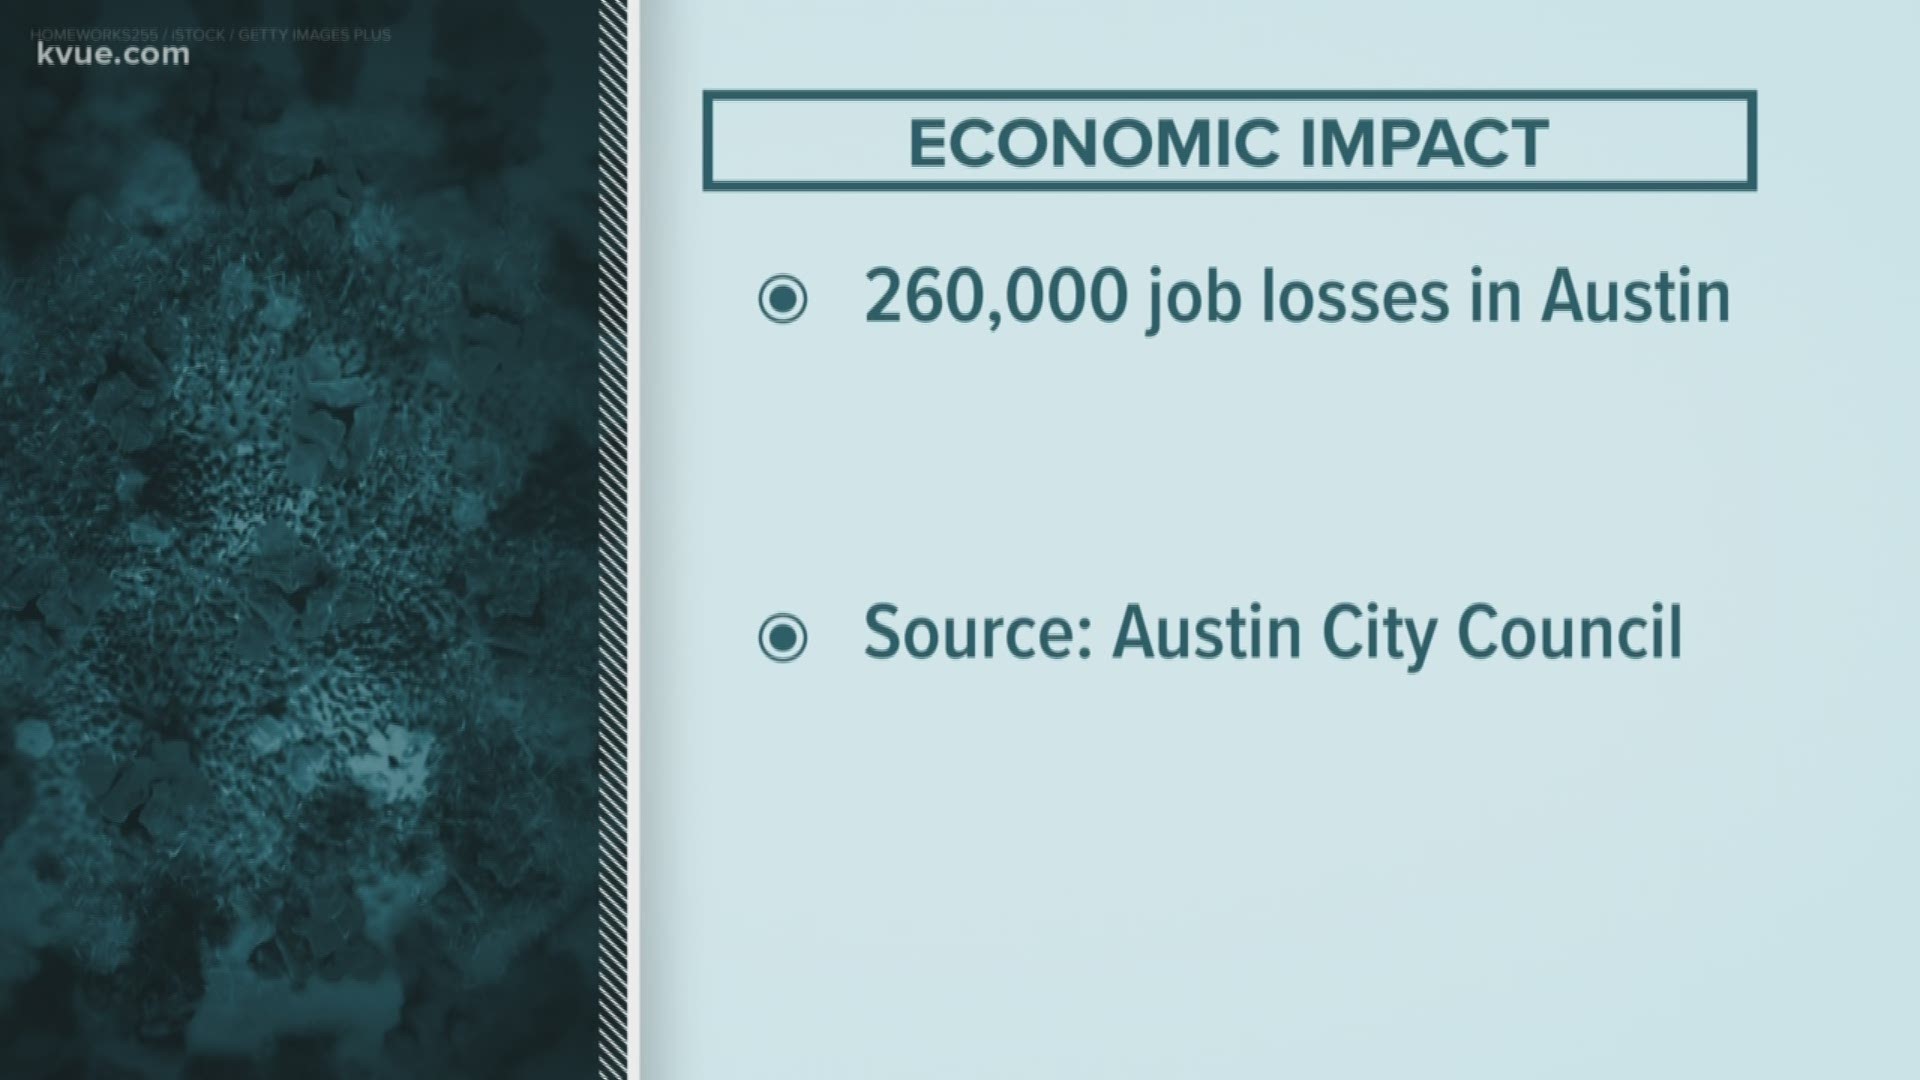 We're getting a better sense of the struggle the City of Austin is facing as a result of the pandemic.